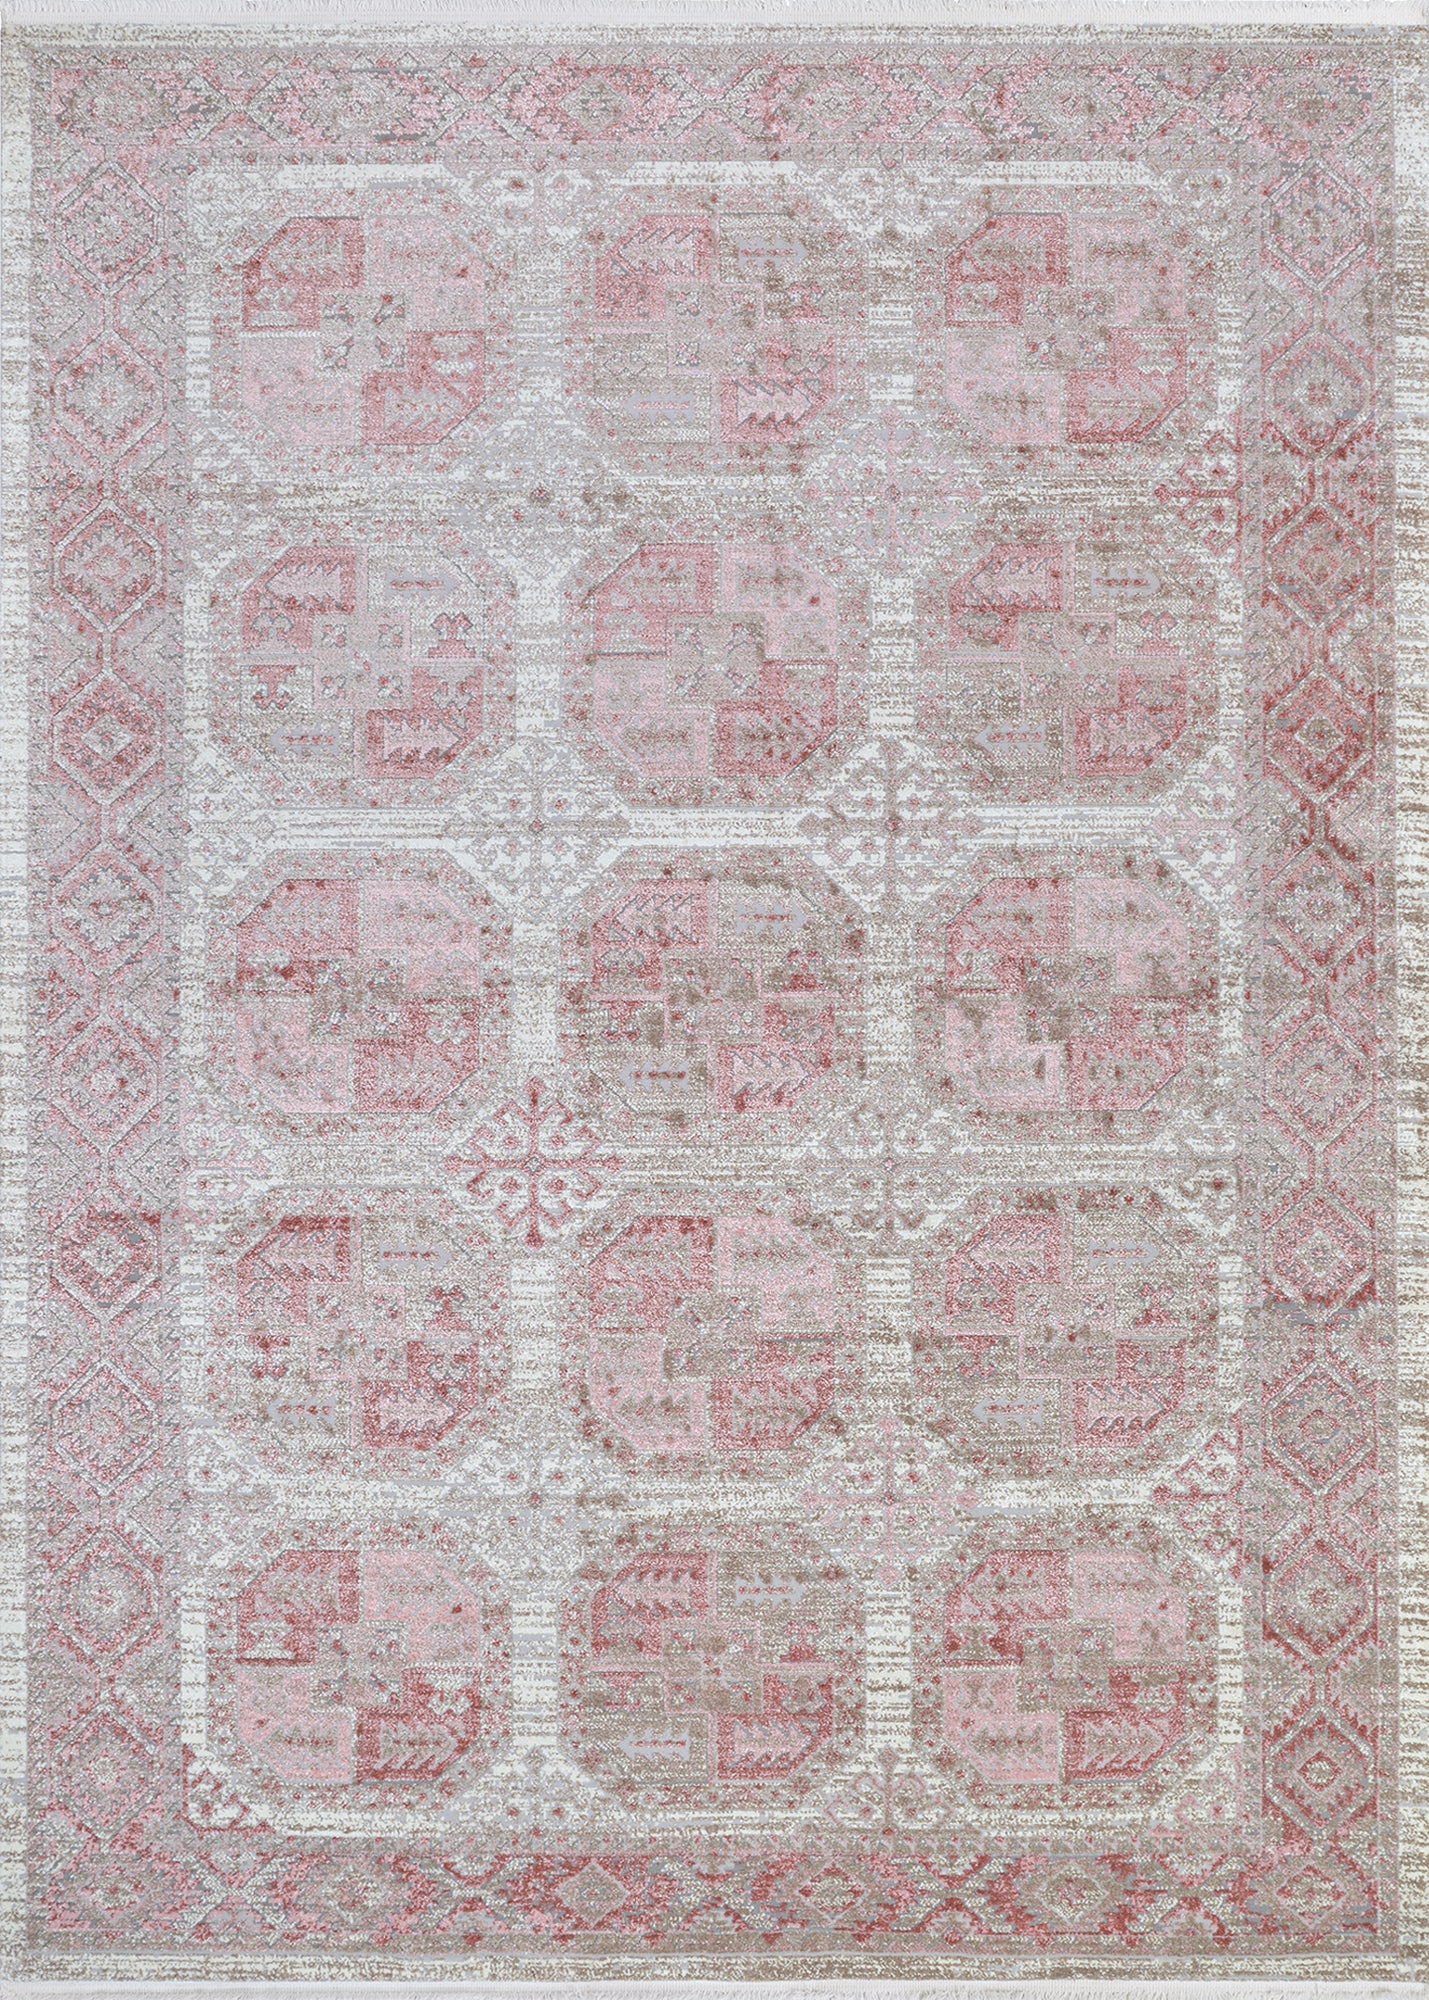 Couristan Marblehead Bokhara 2531/0255 Rustic Pink Area Rug